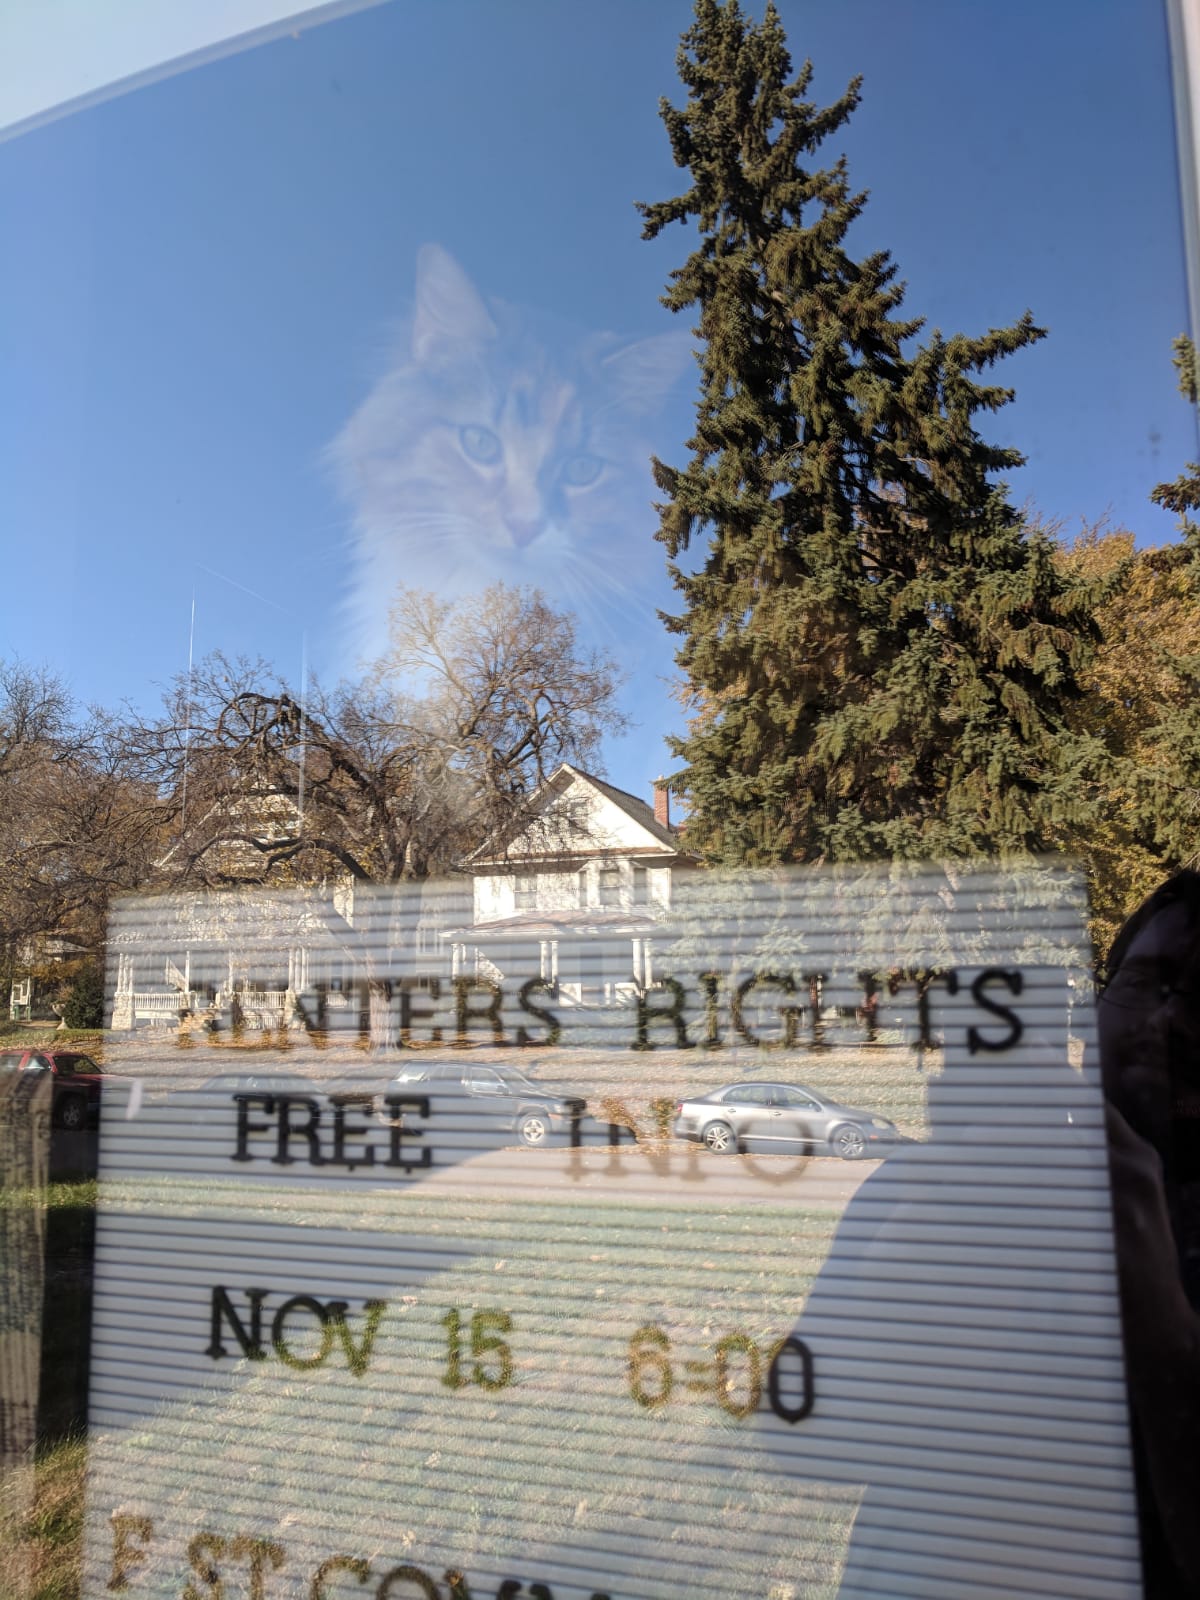 Tally staring thoughtfully through a window above a sign promising free info on Renters Rights at an event on November 15